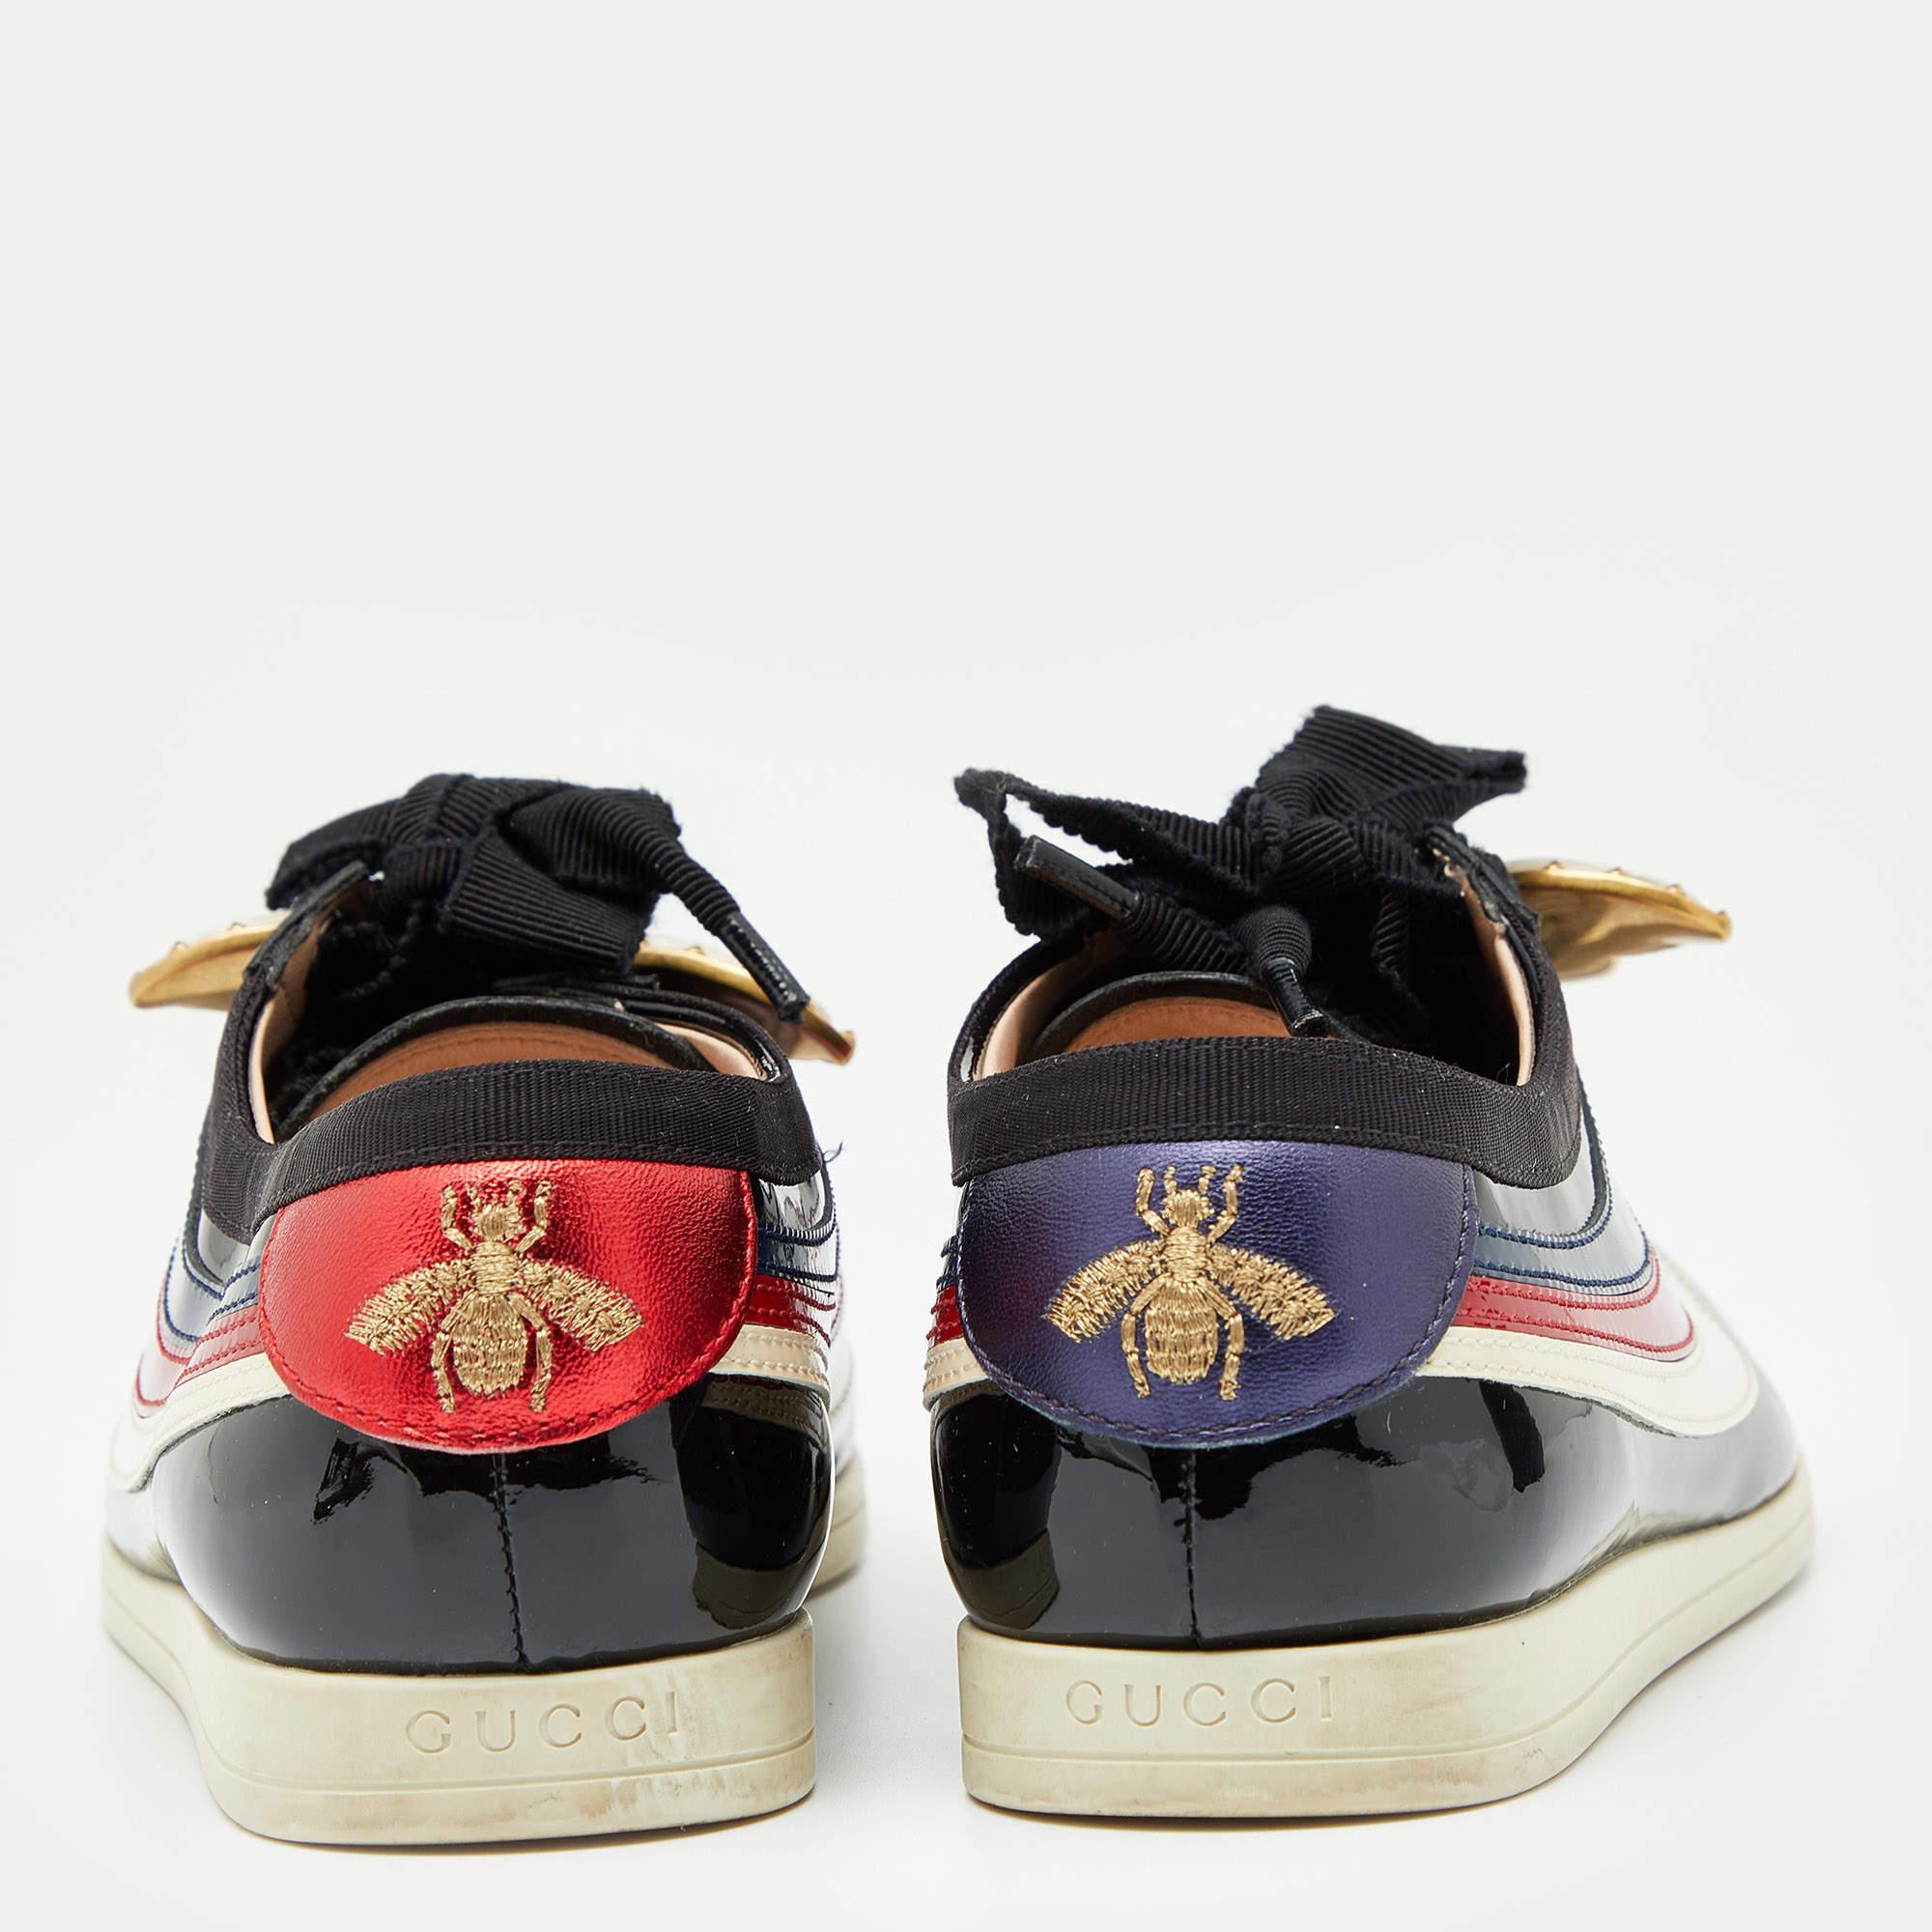 These adorable sneakers are from Gucci. They've been crafted from patent leather and designed as round toes with other details such as lace-ups and butterfly appliques on the uppers. The multicolored sneakers will offer both comfort and style.

